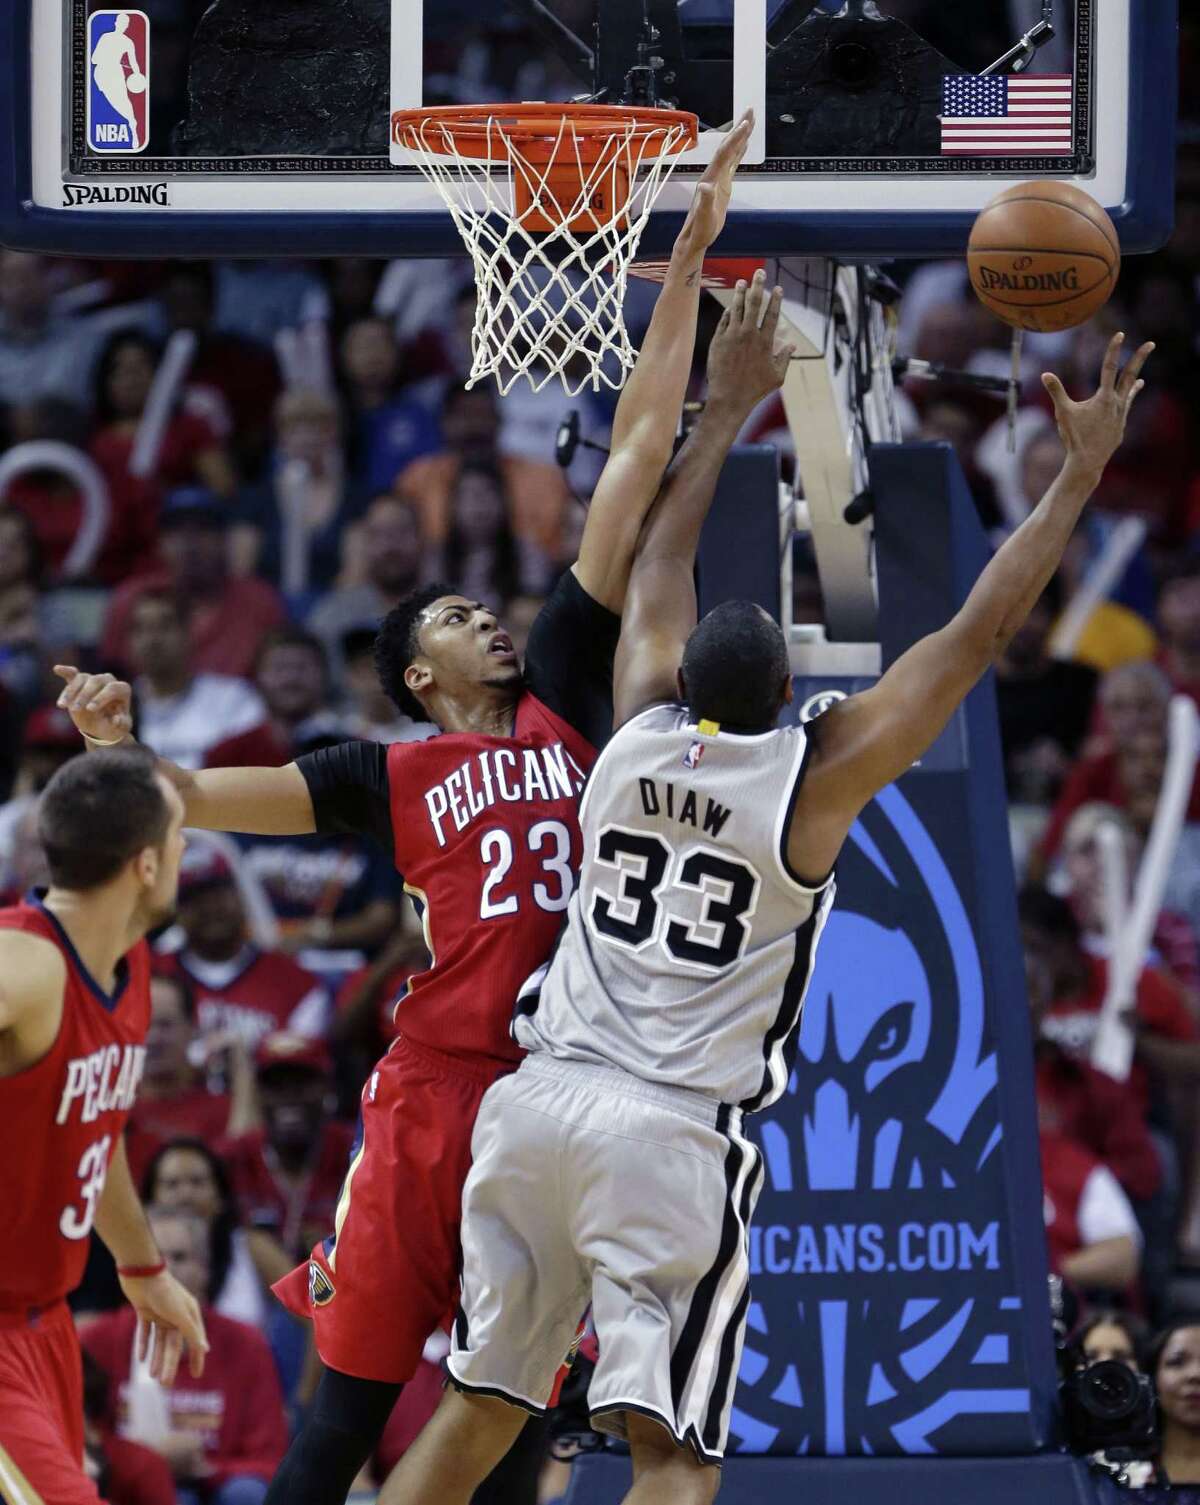 Antonio Spurs center Boris Diaw (33) goes to the basket against New Orleans Pelicans forward Anthony Davis (23) in the first half of an NBA basketball game in New Orleans, Wednesday, April 15, 2015. (AP Photo/Gerald Herbert)San